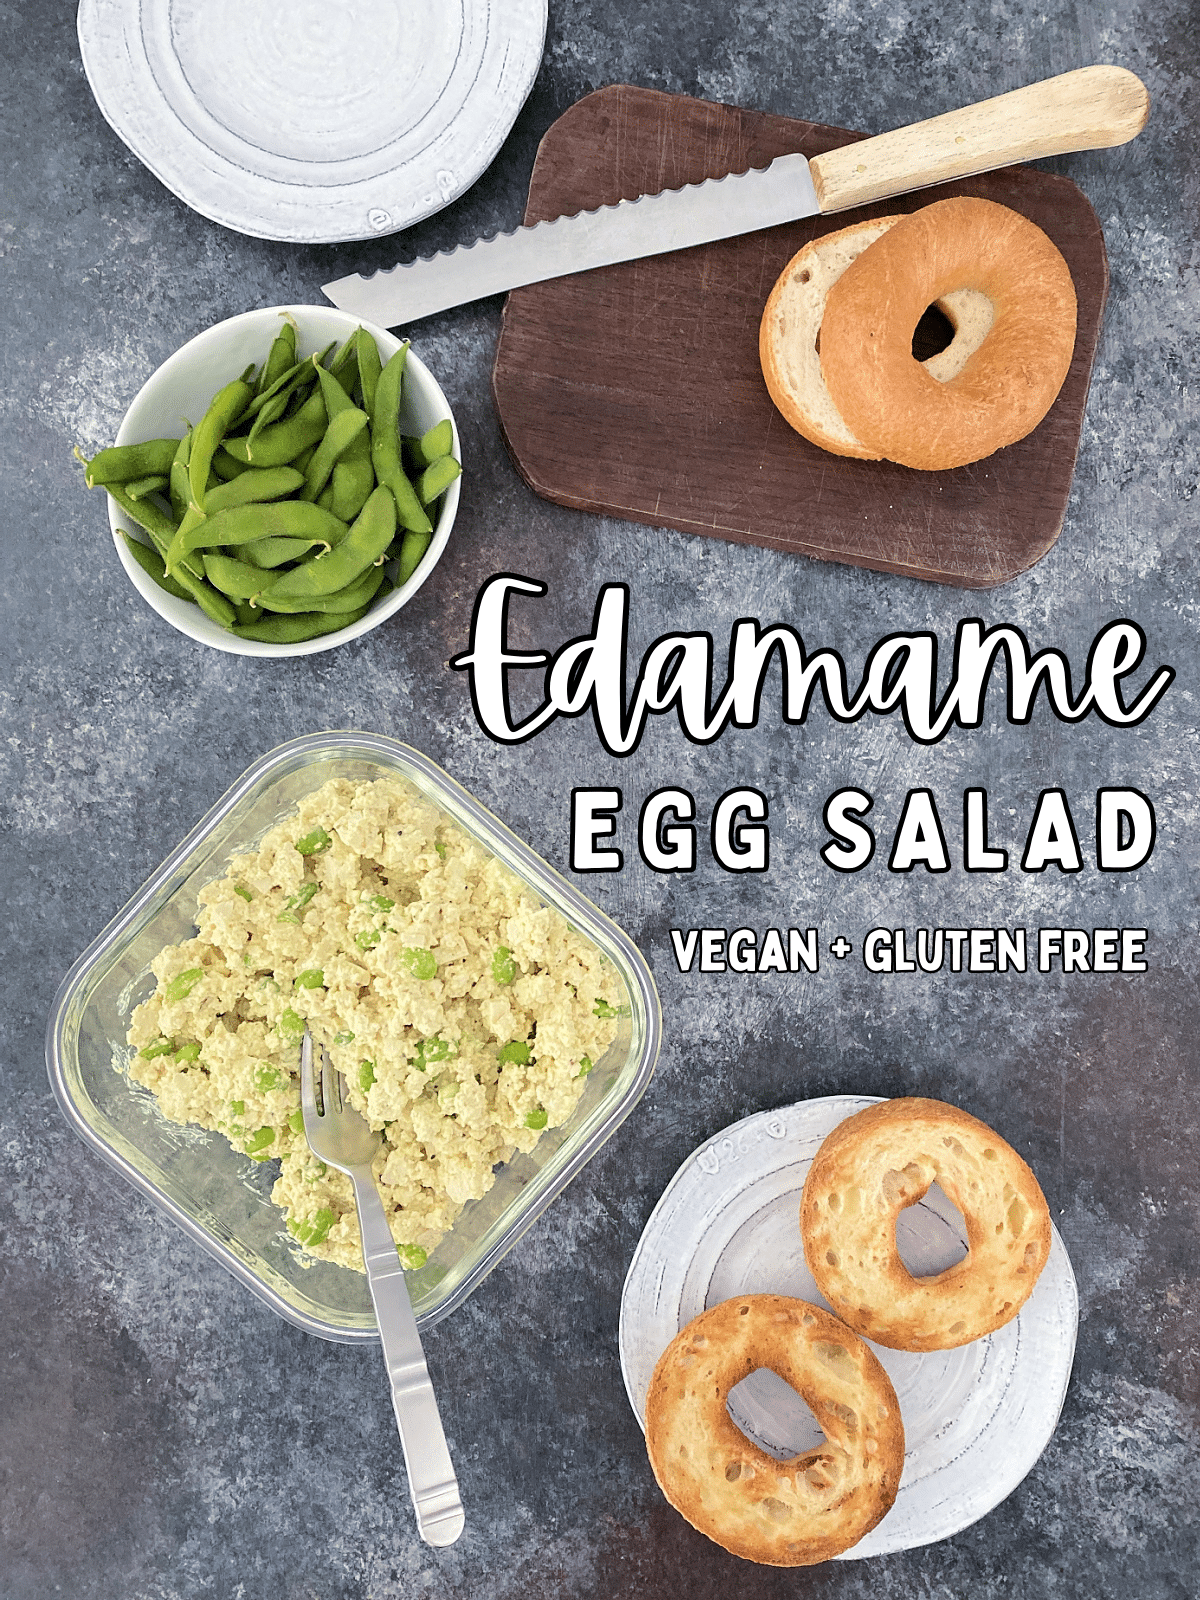 Overhead view of vegan edamame egg salad in a square glass container, with a small bowl of unshelled edamame, a small cutting board with a bagel and knife, and a plate with a toasted sliced bagel.